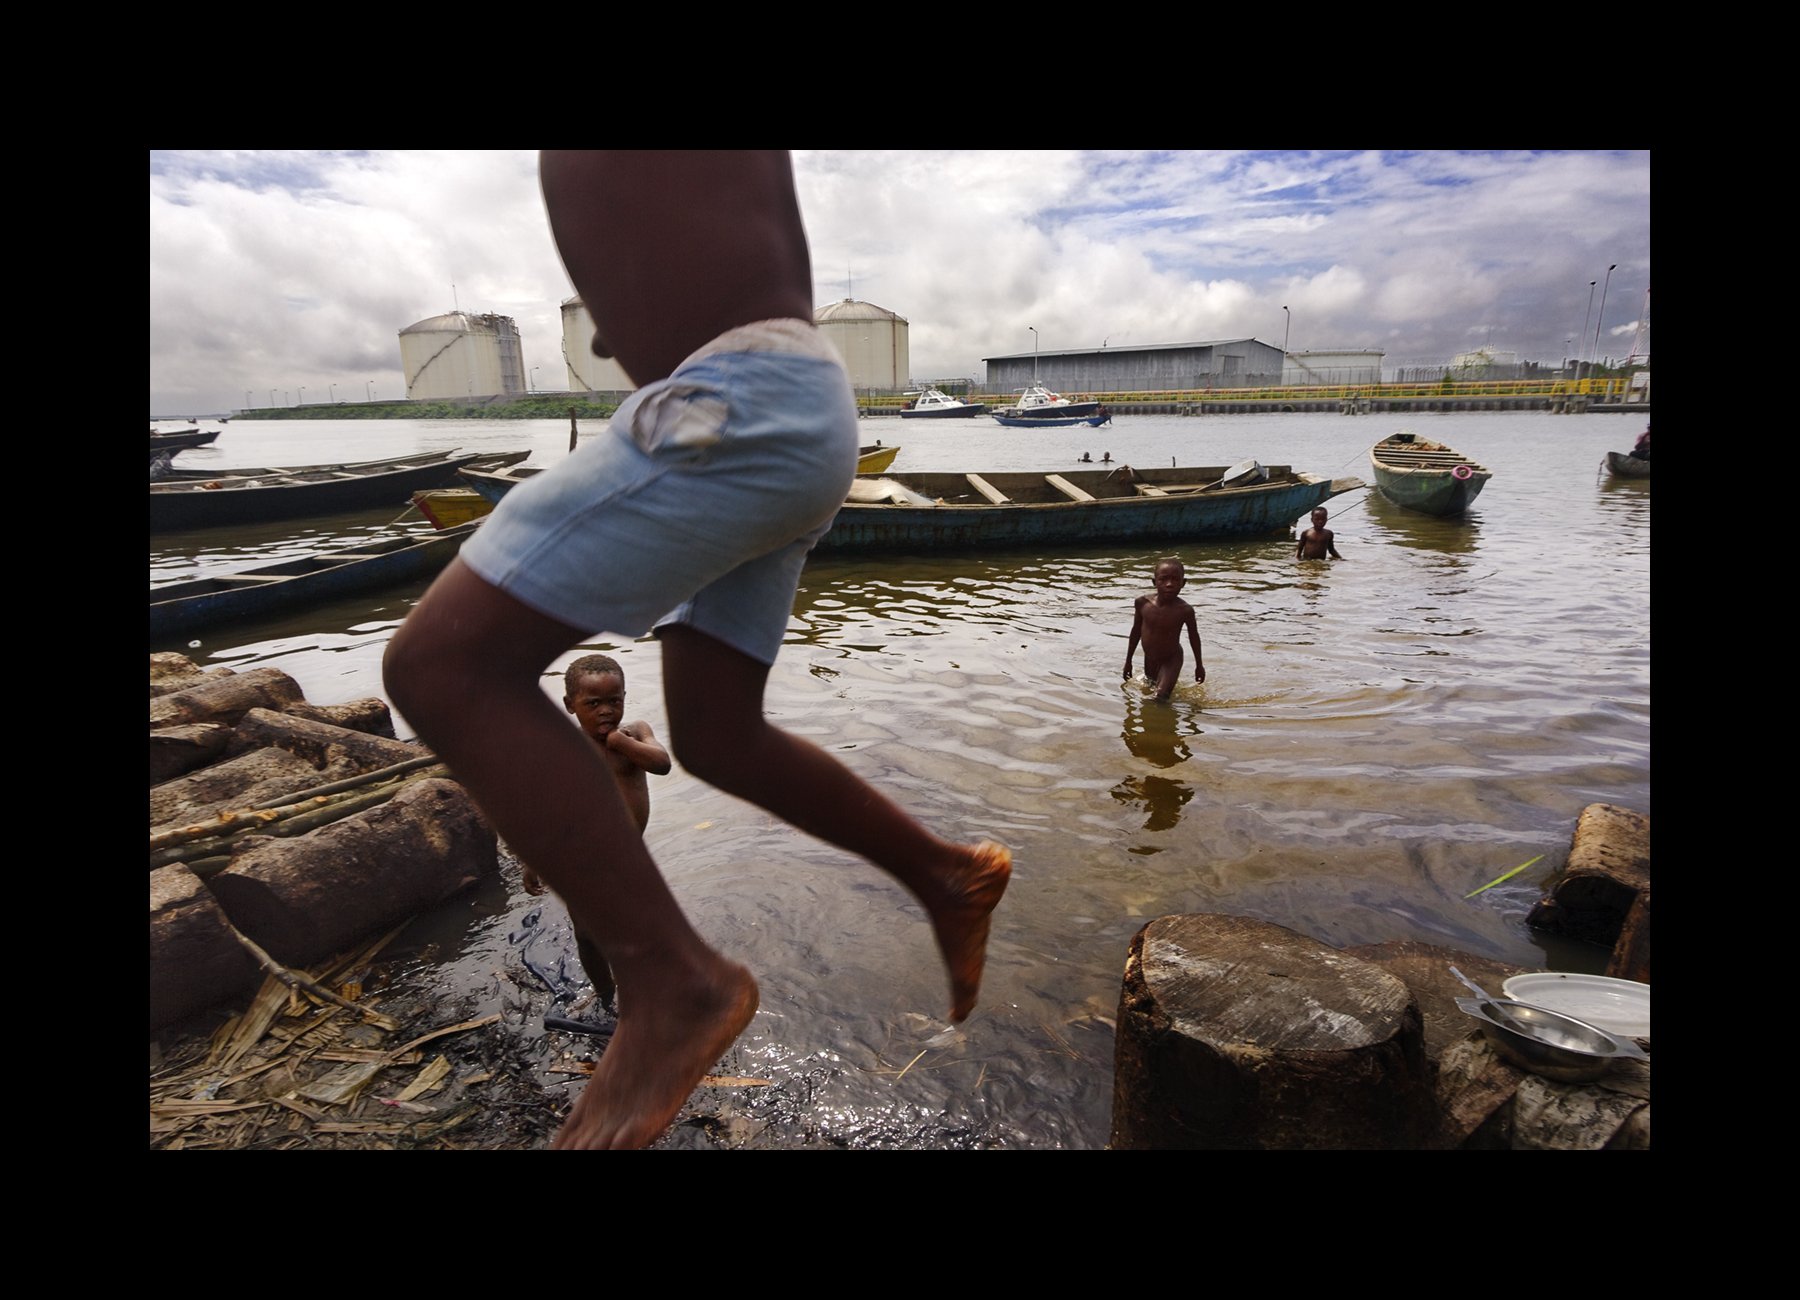   Bonny Island, Niger Delta, 2004       Children play in polluted waters.   